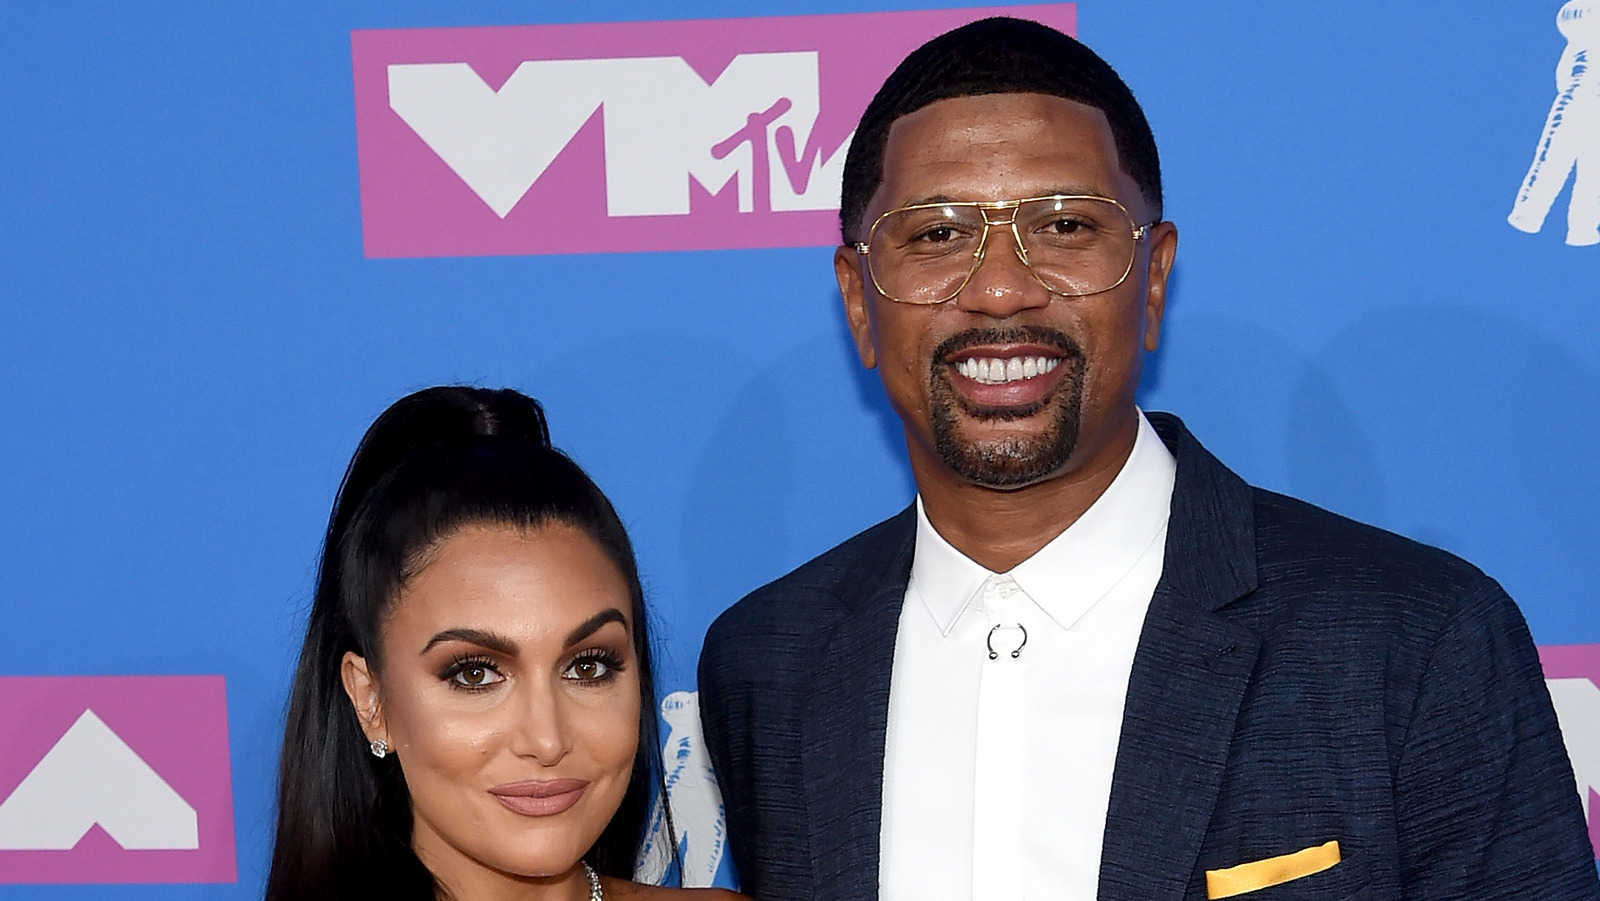 Over the years, former NBA player Jalen Rose and journalist Molly Qerim hav...